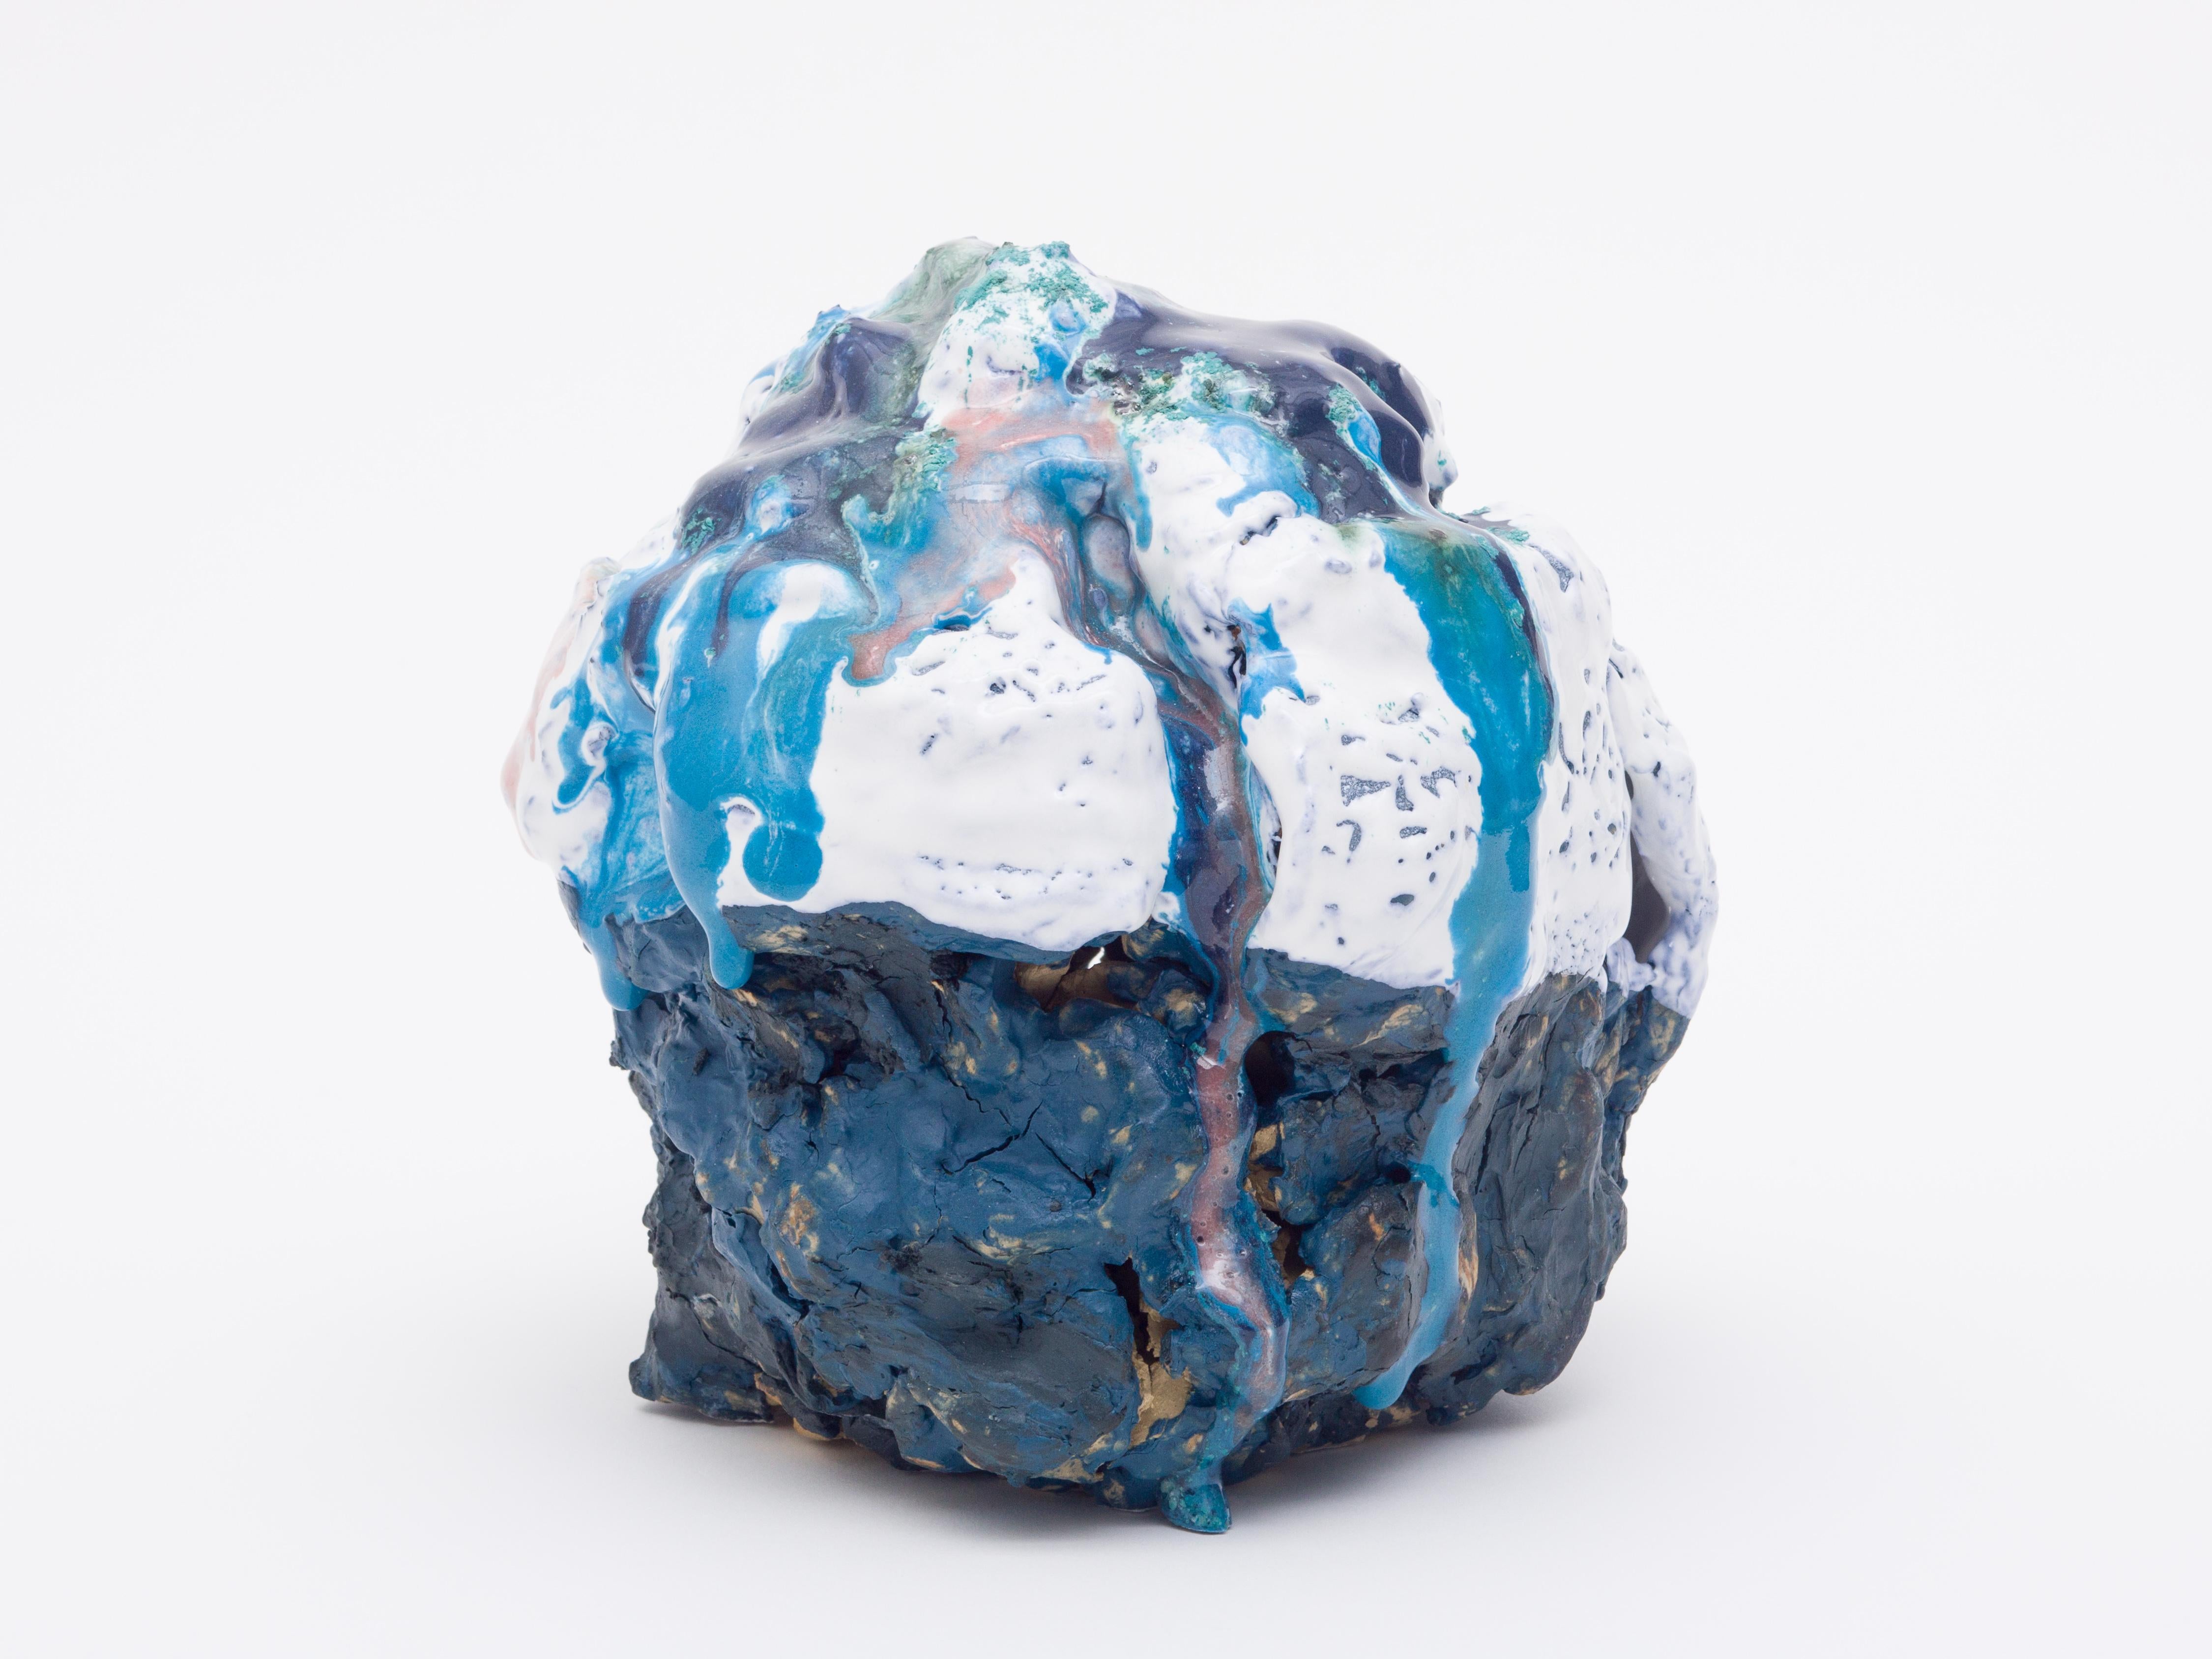 Mary-Lynn Massoud and Rasha Nawam focus their latest creations on instinctive trials and possible contingencies, rather than a premeditated process. The ceramists expose an extended series of investigations into materials such as, stoneware, glass,